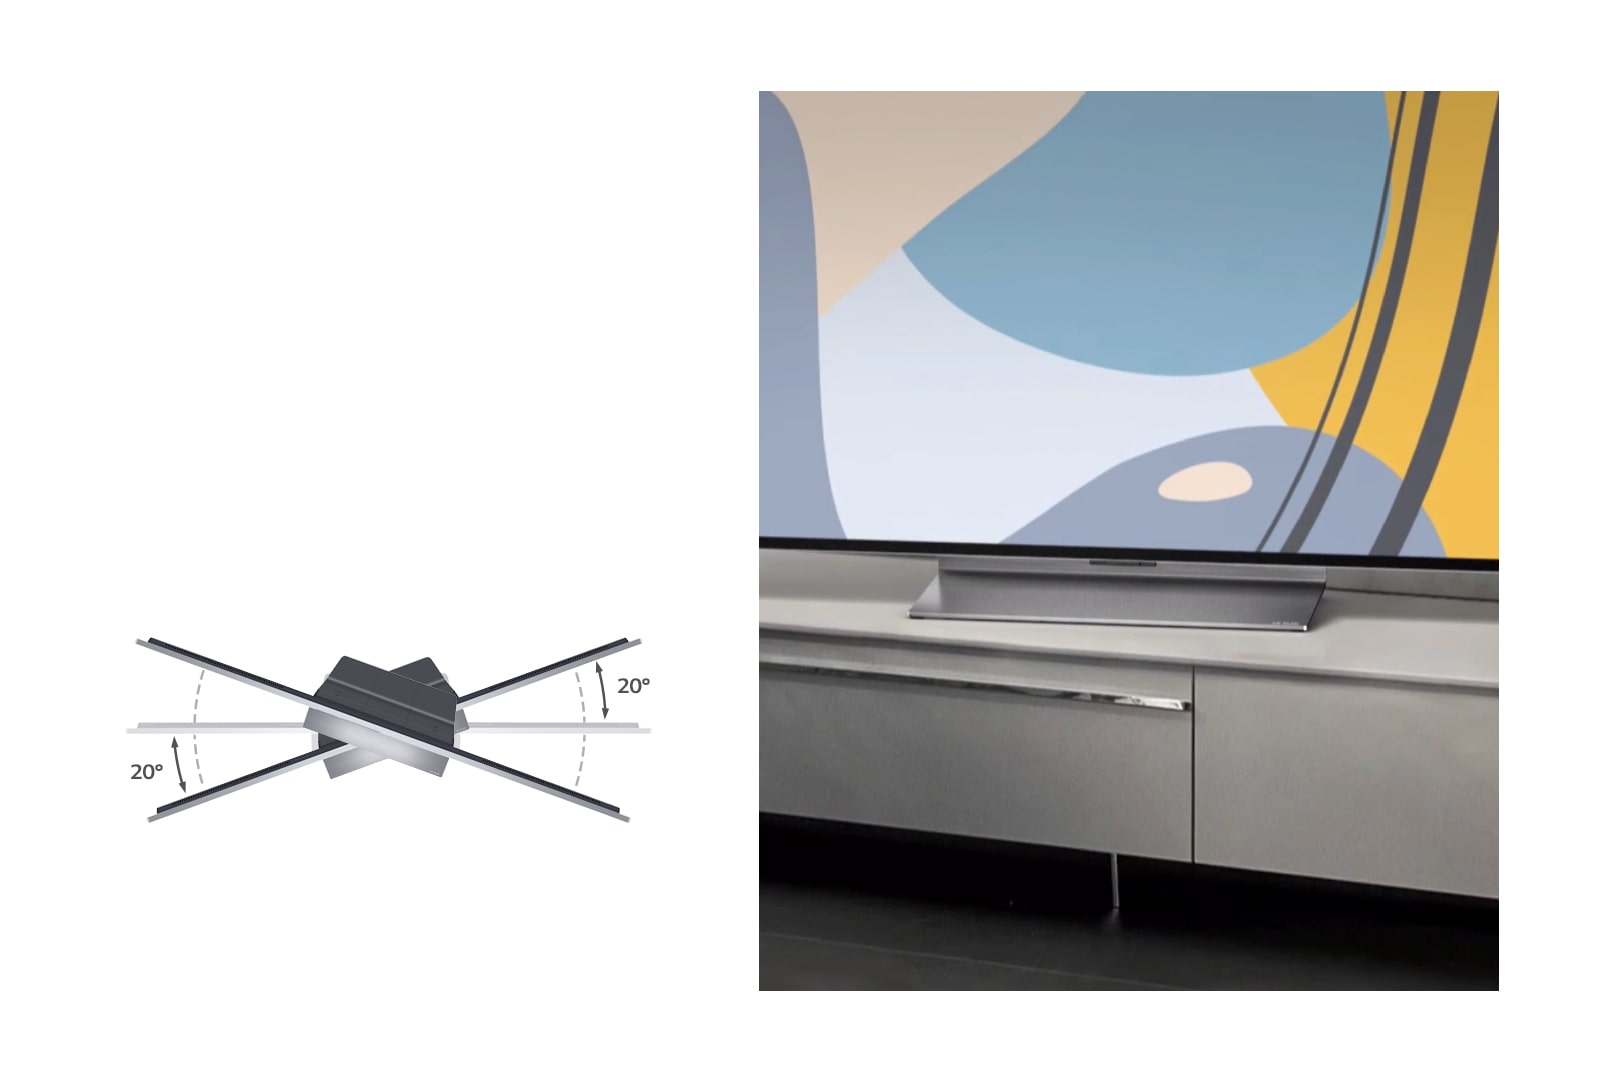 Swivel Stand with mounted LG TV on a short TV stand. A diagram underneath shows the angles you can rotate your TV with the stand’s 20-degree swivel.